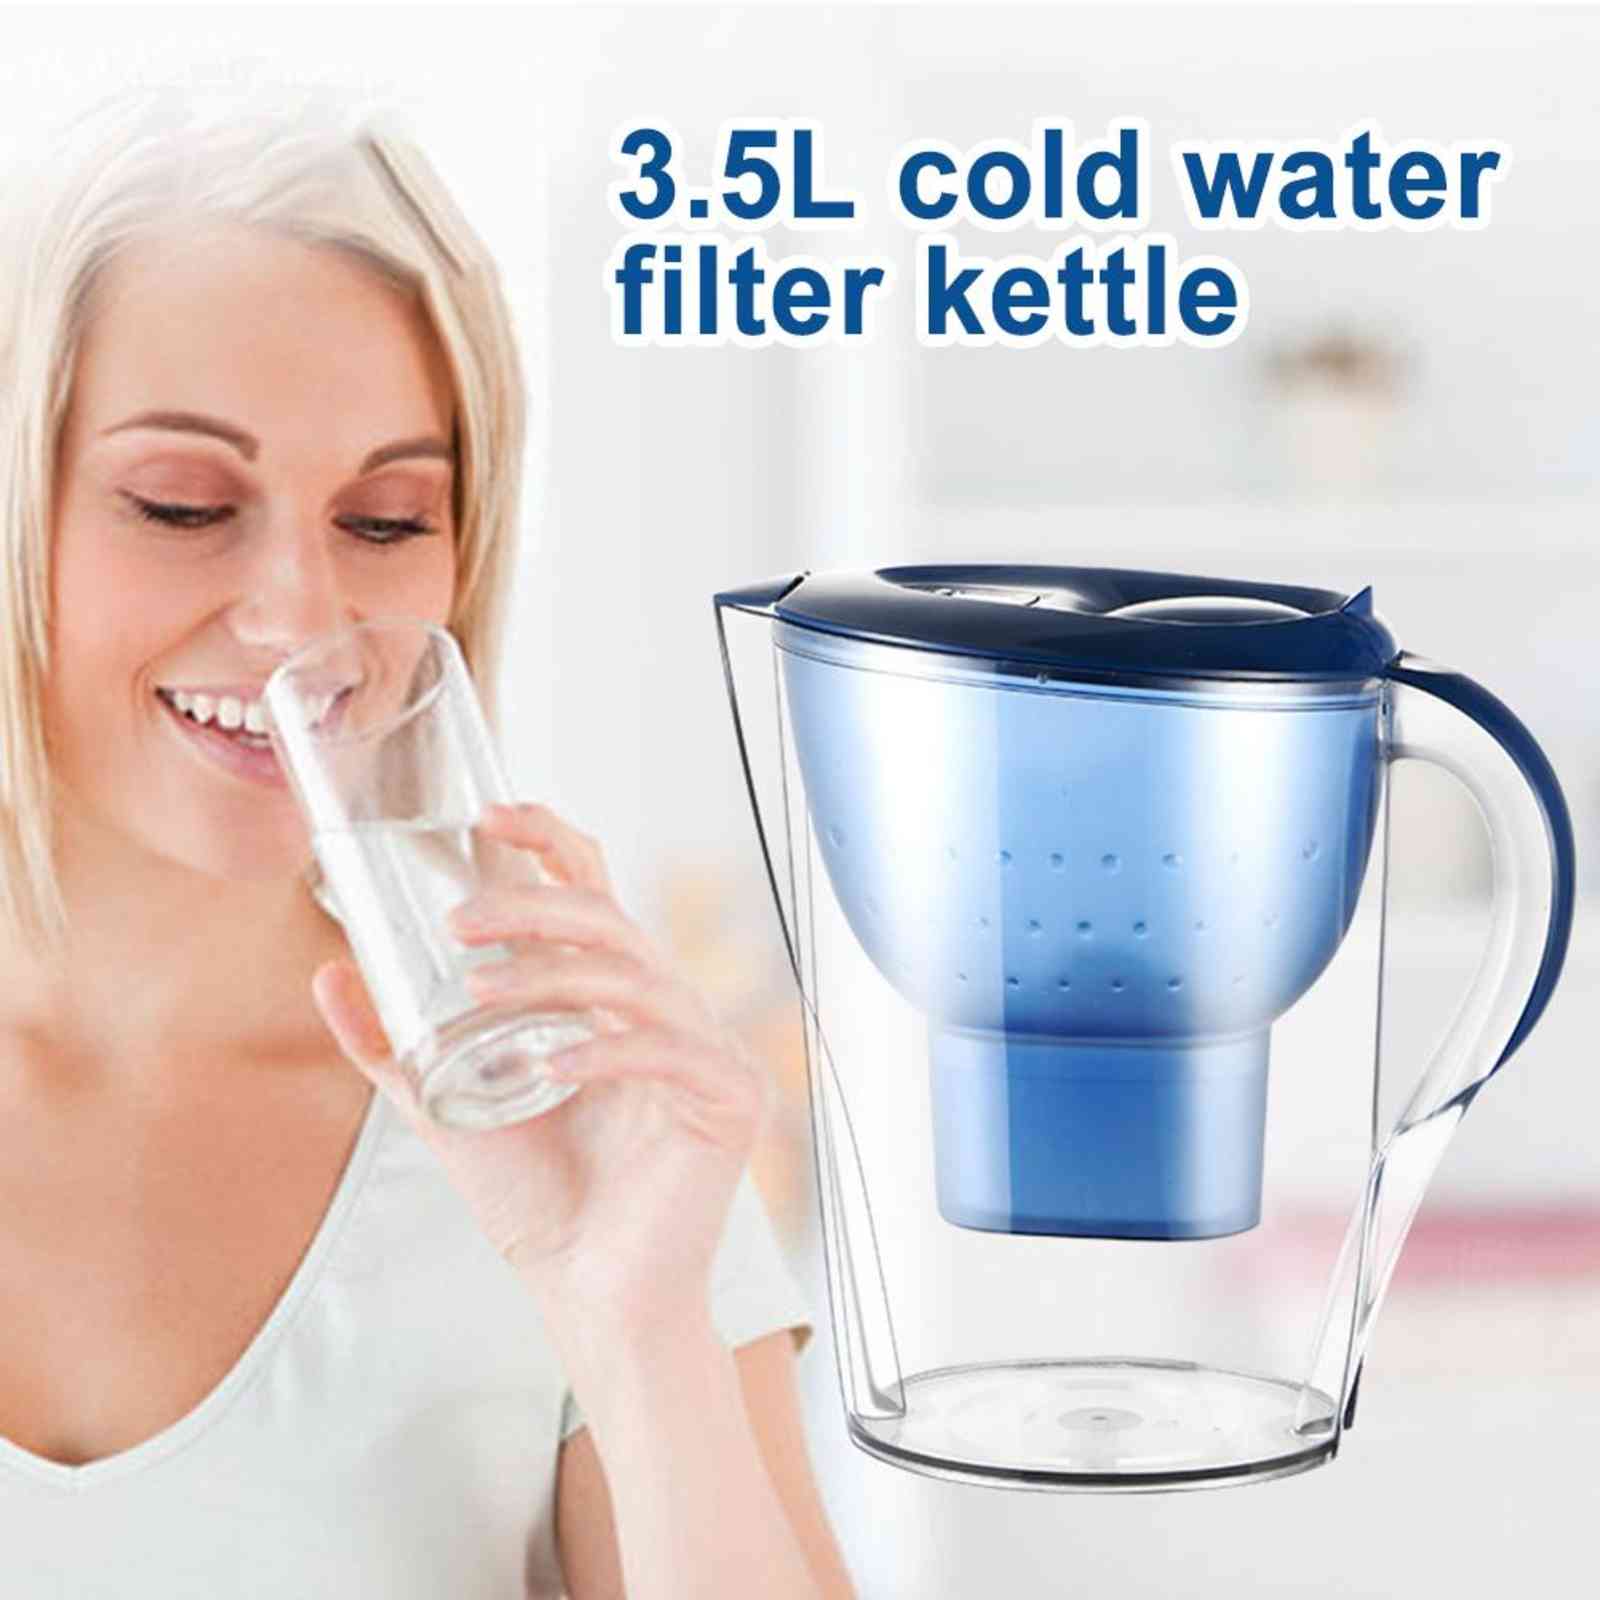 

3.5L Portable Activated Carbon Cold Water Filter Purifier Kettle for Health Kitchen Home Office Filters Pitcher